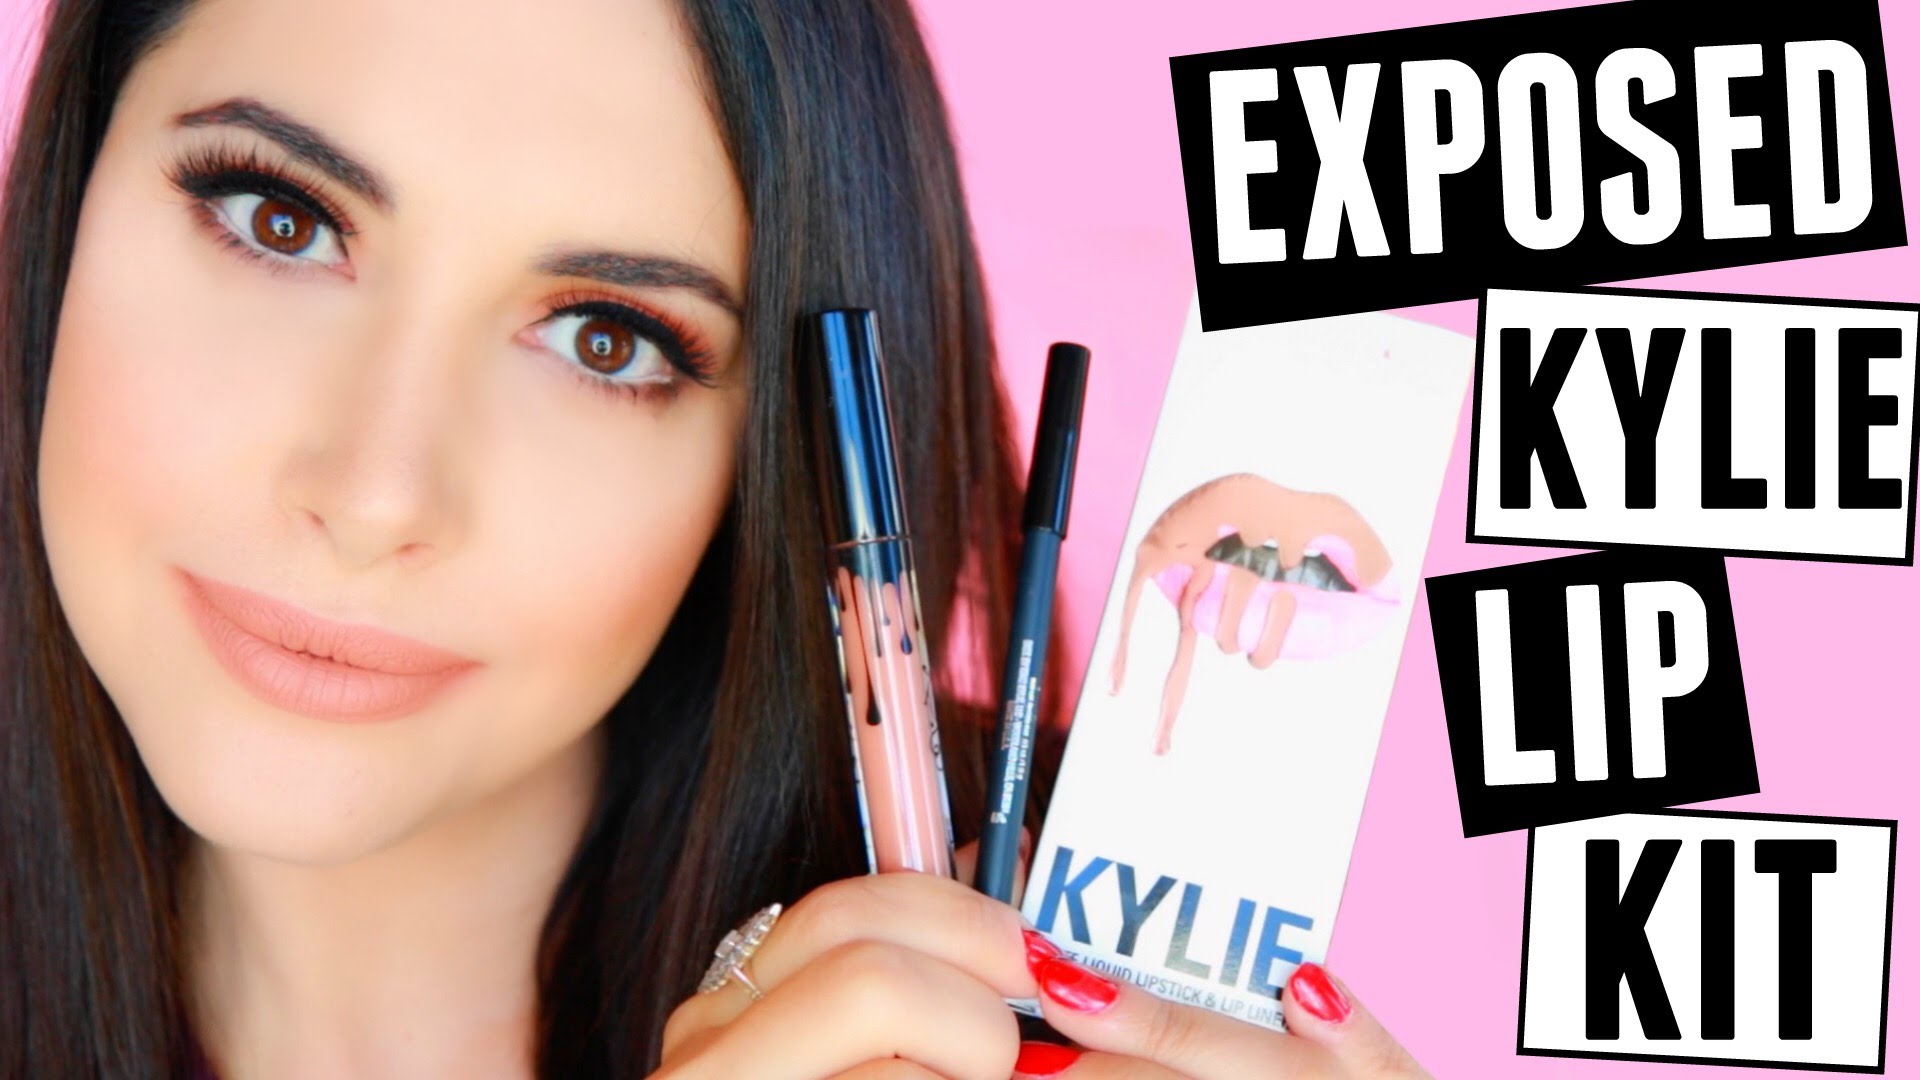 EXPOSED KYLIE LIP KIT REVIEW, SWATCH, DUPE & GIVEAWAY - YouTube